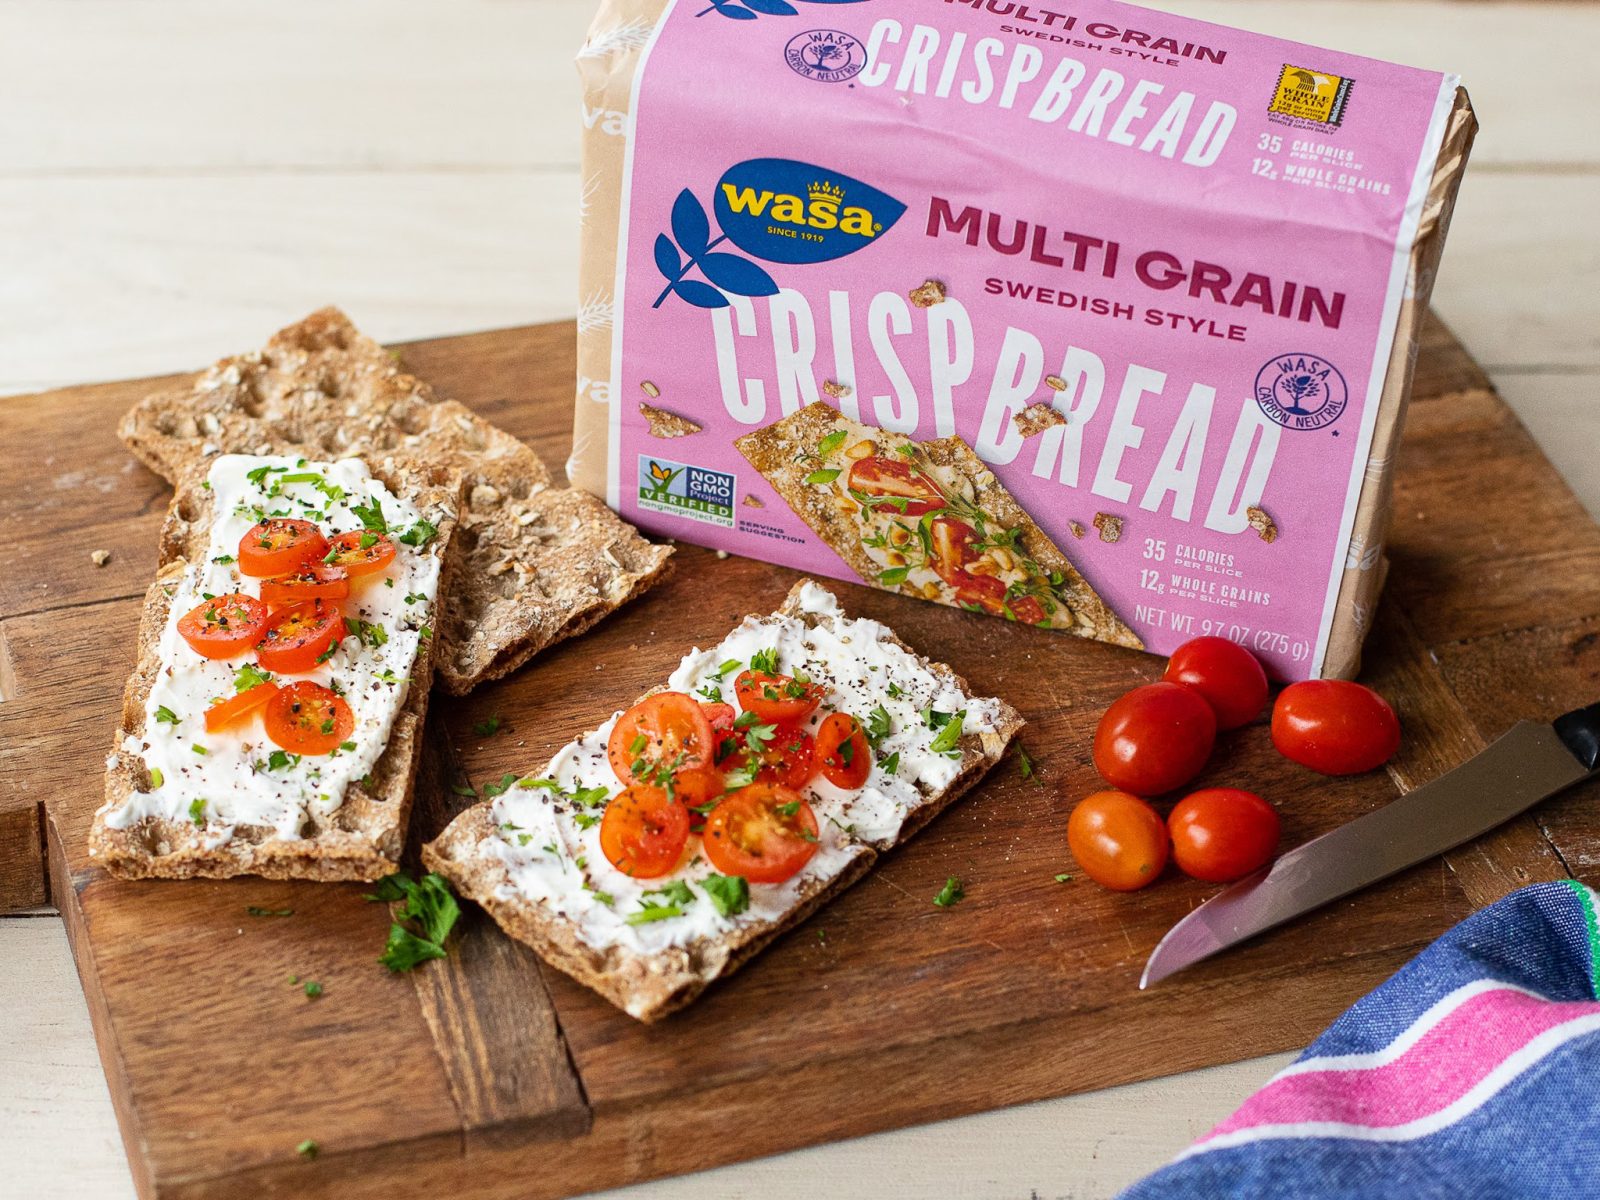 Wasa Crispbread Products As Low As $1.99 At Kroger